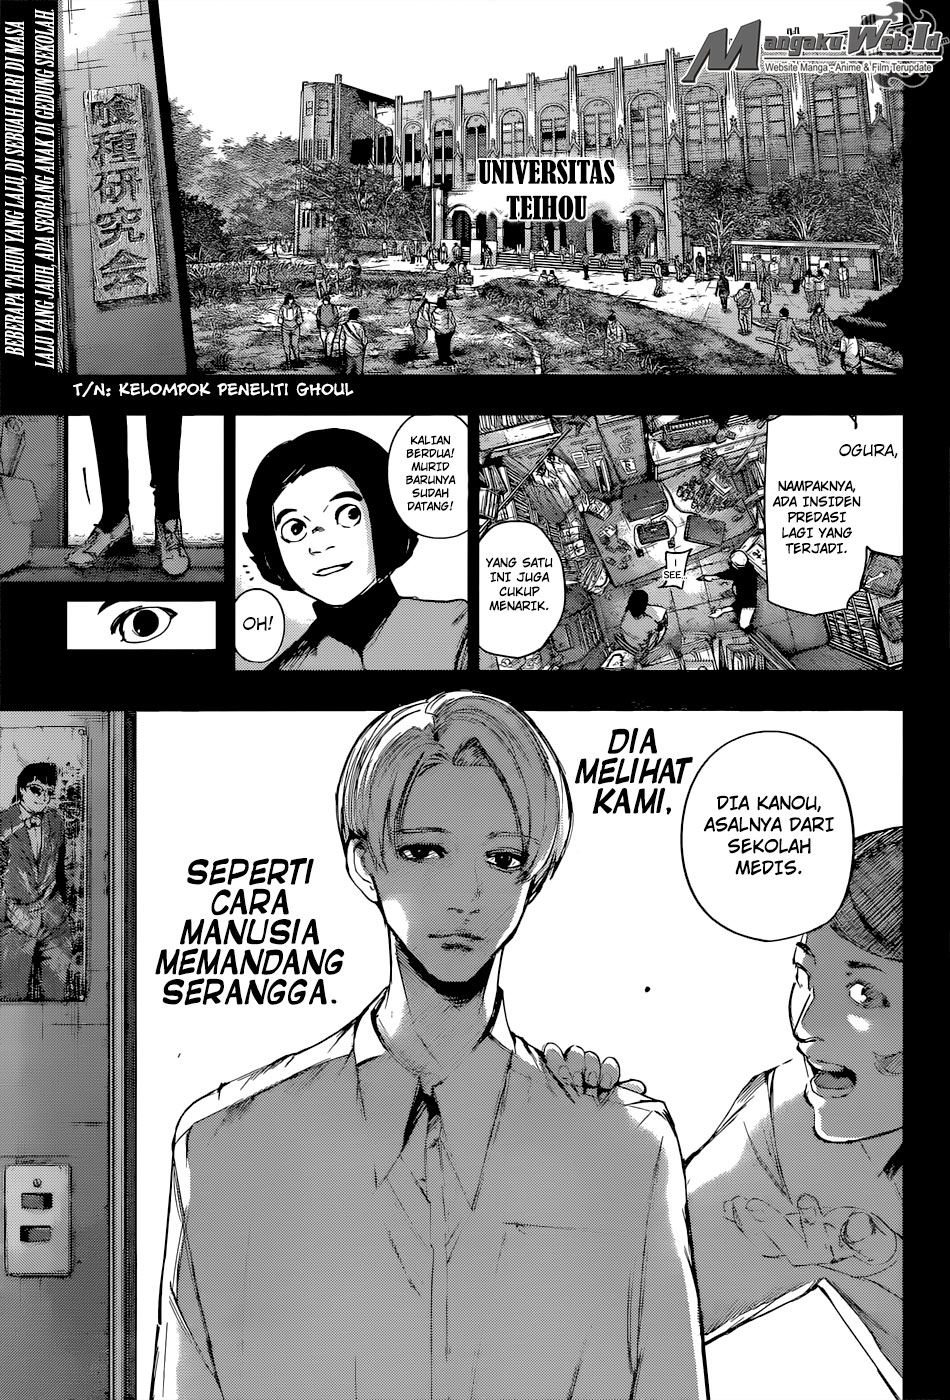 Tokyo Ghoul:re Chapter 103